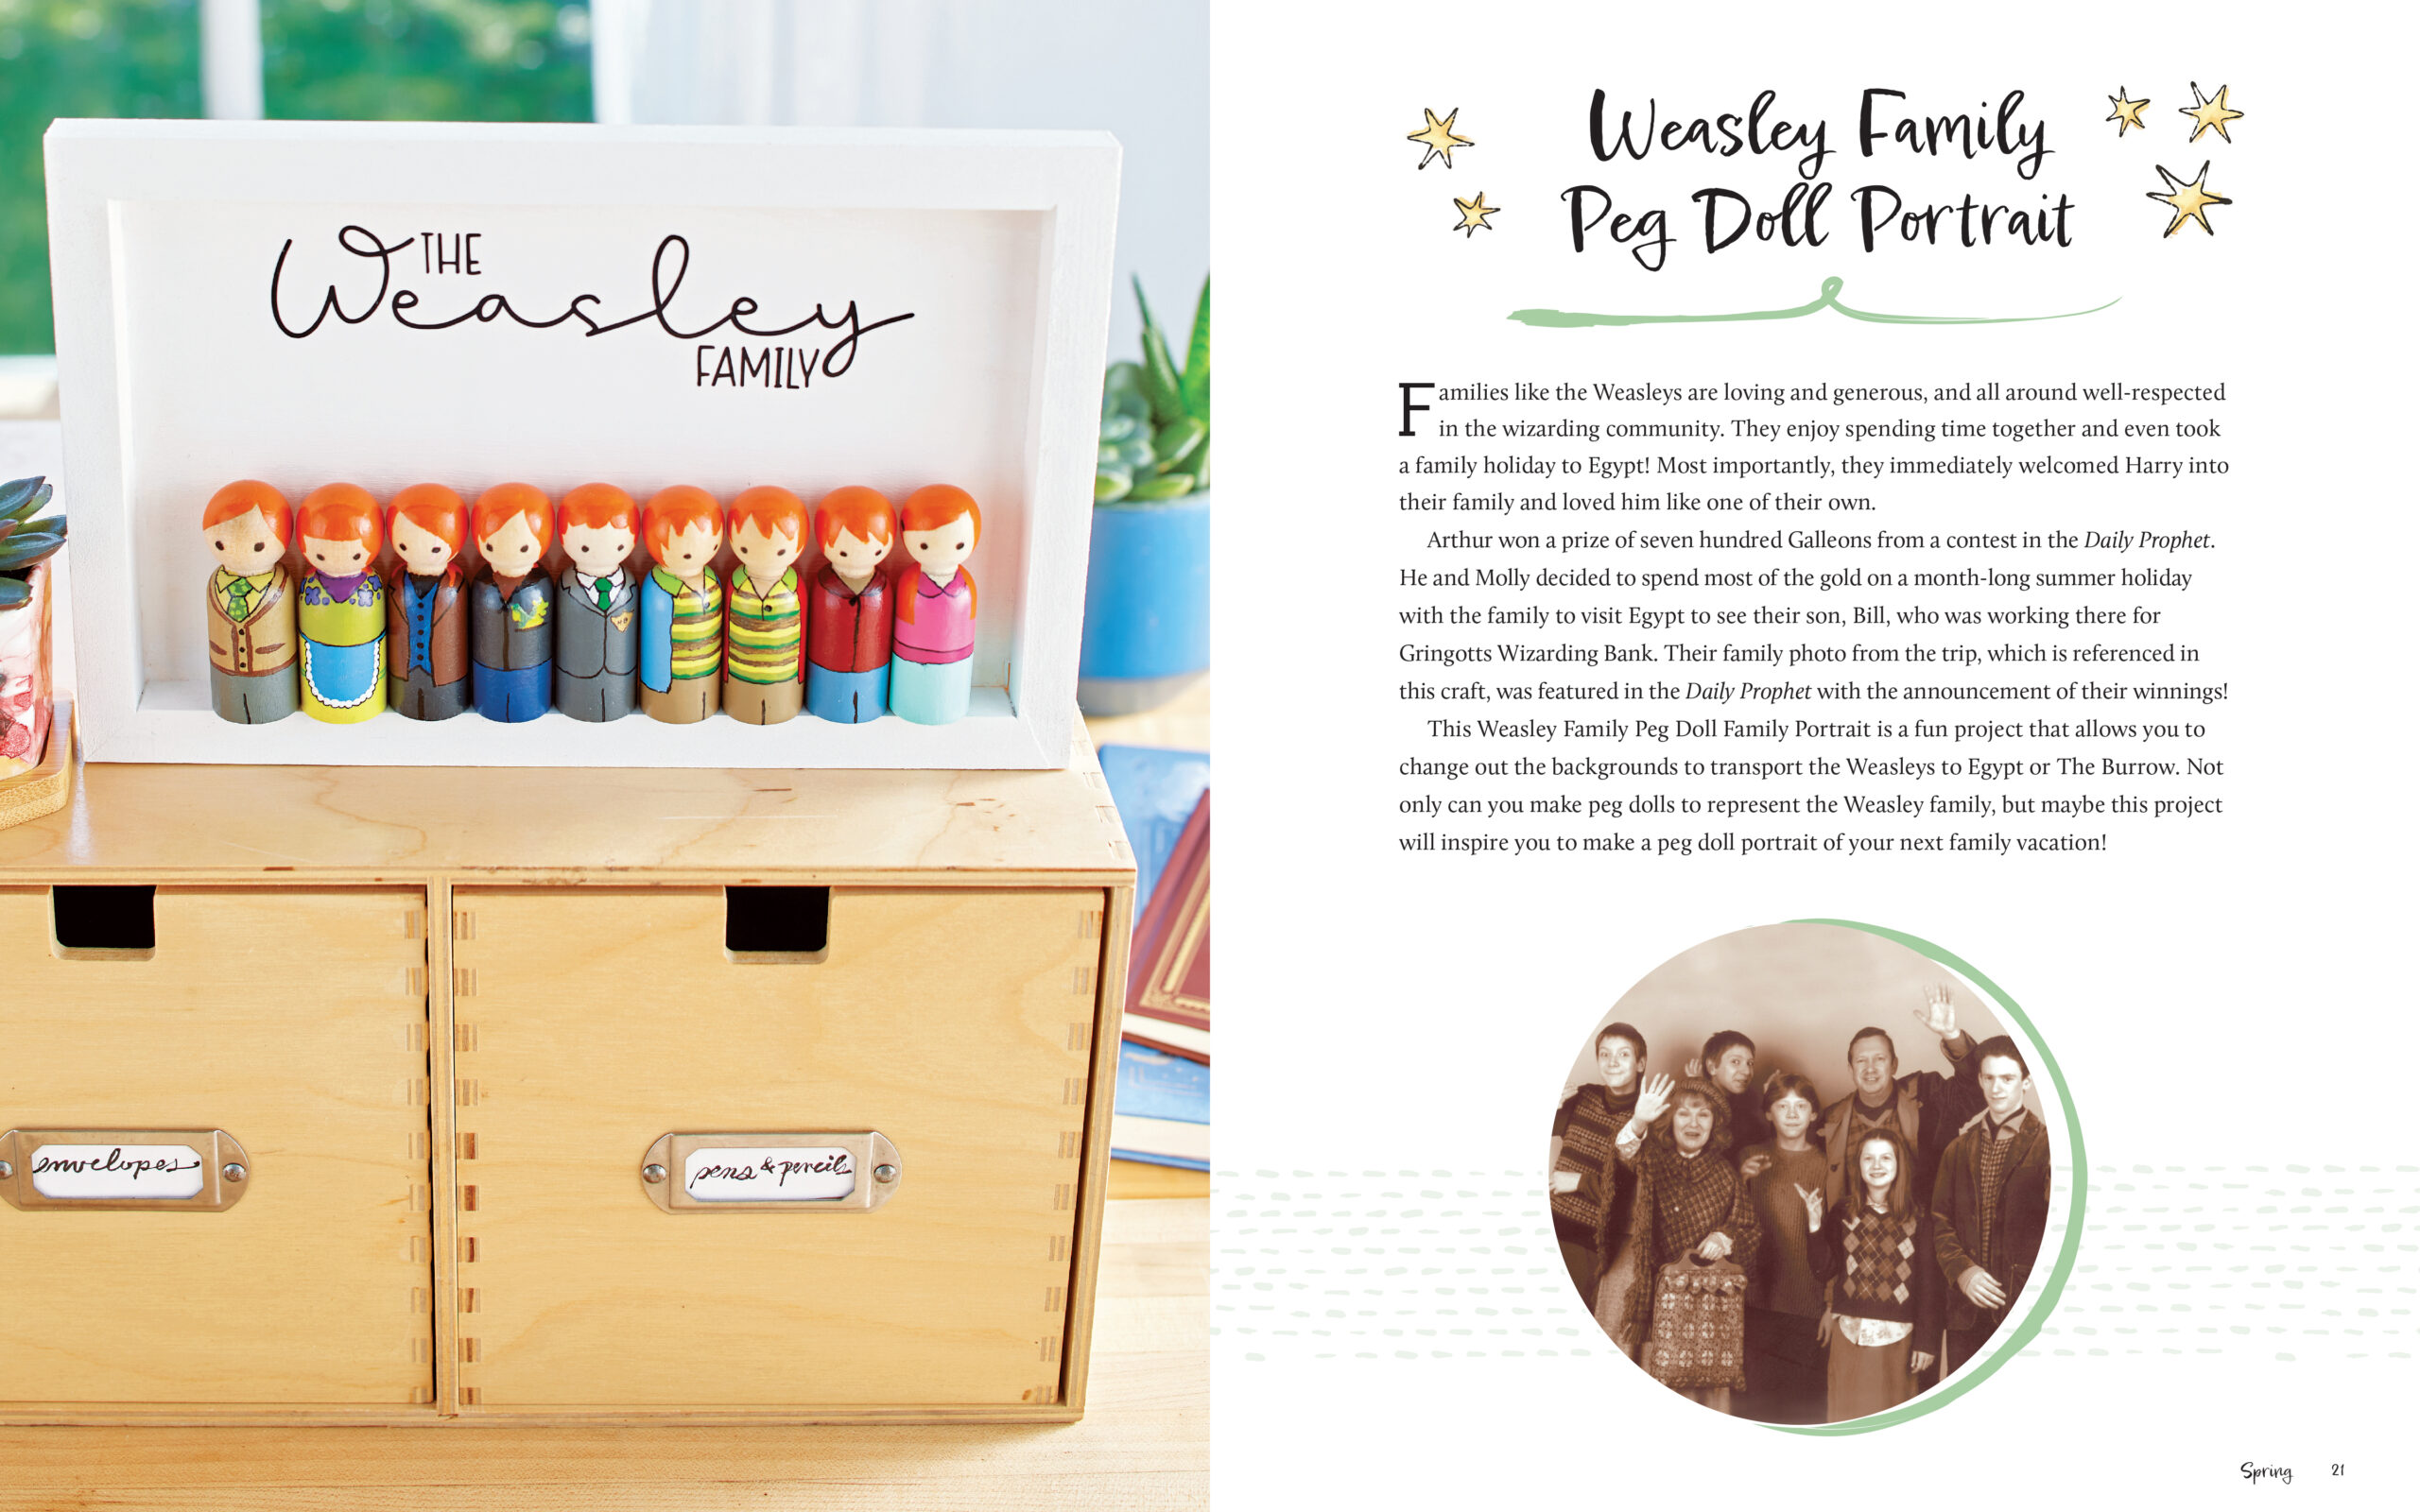 “Harry Potter: Homemade” features instructions for a Weasley family peg doll portrait.